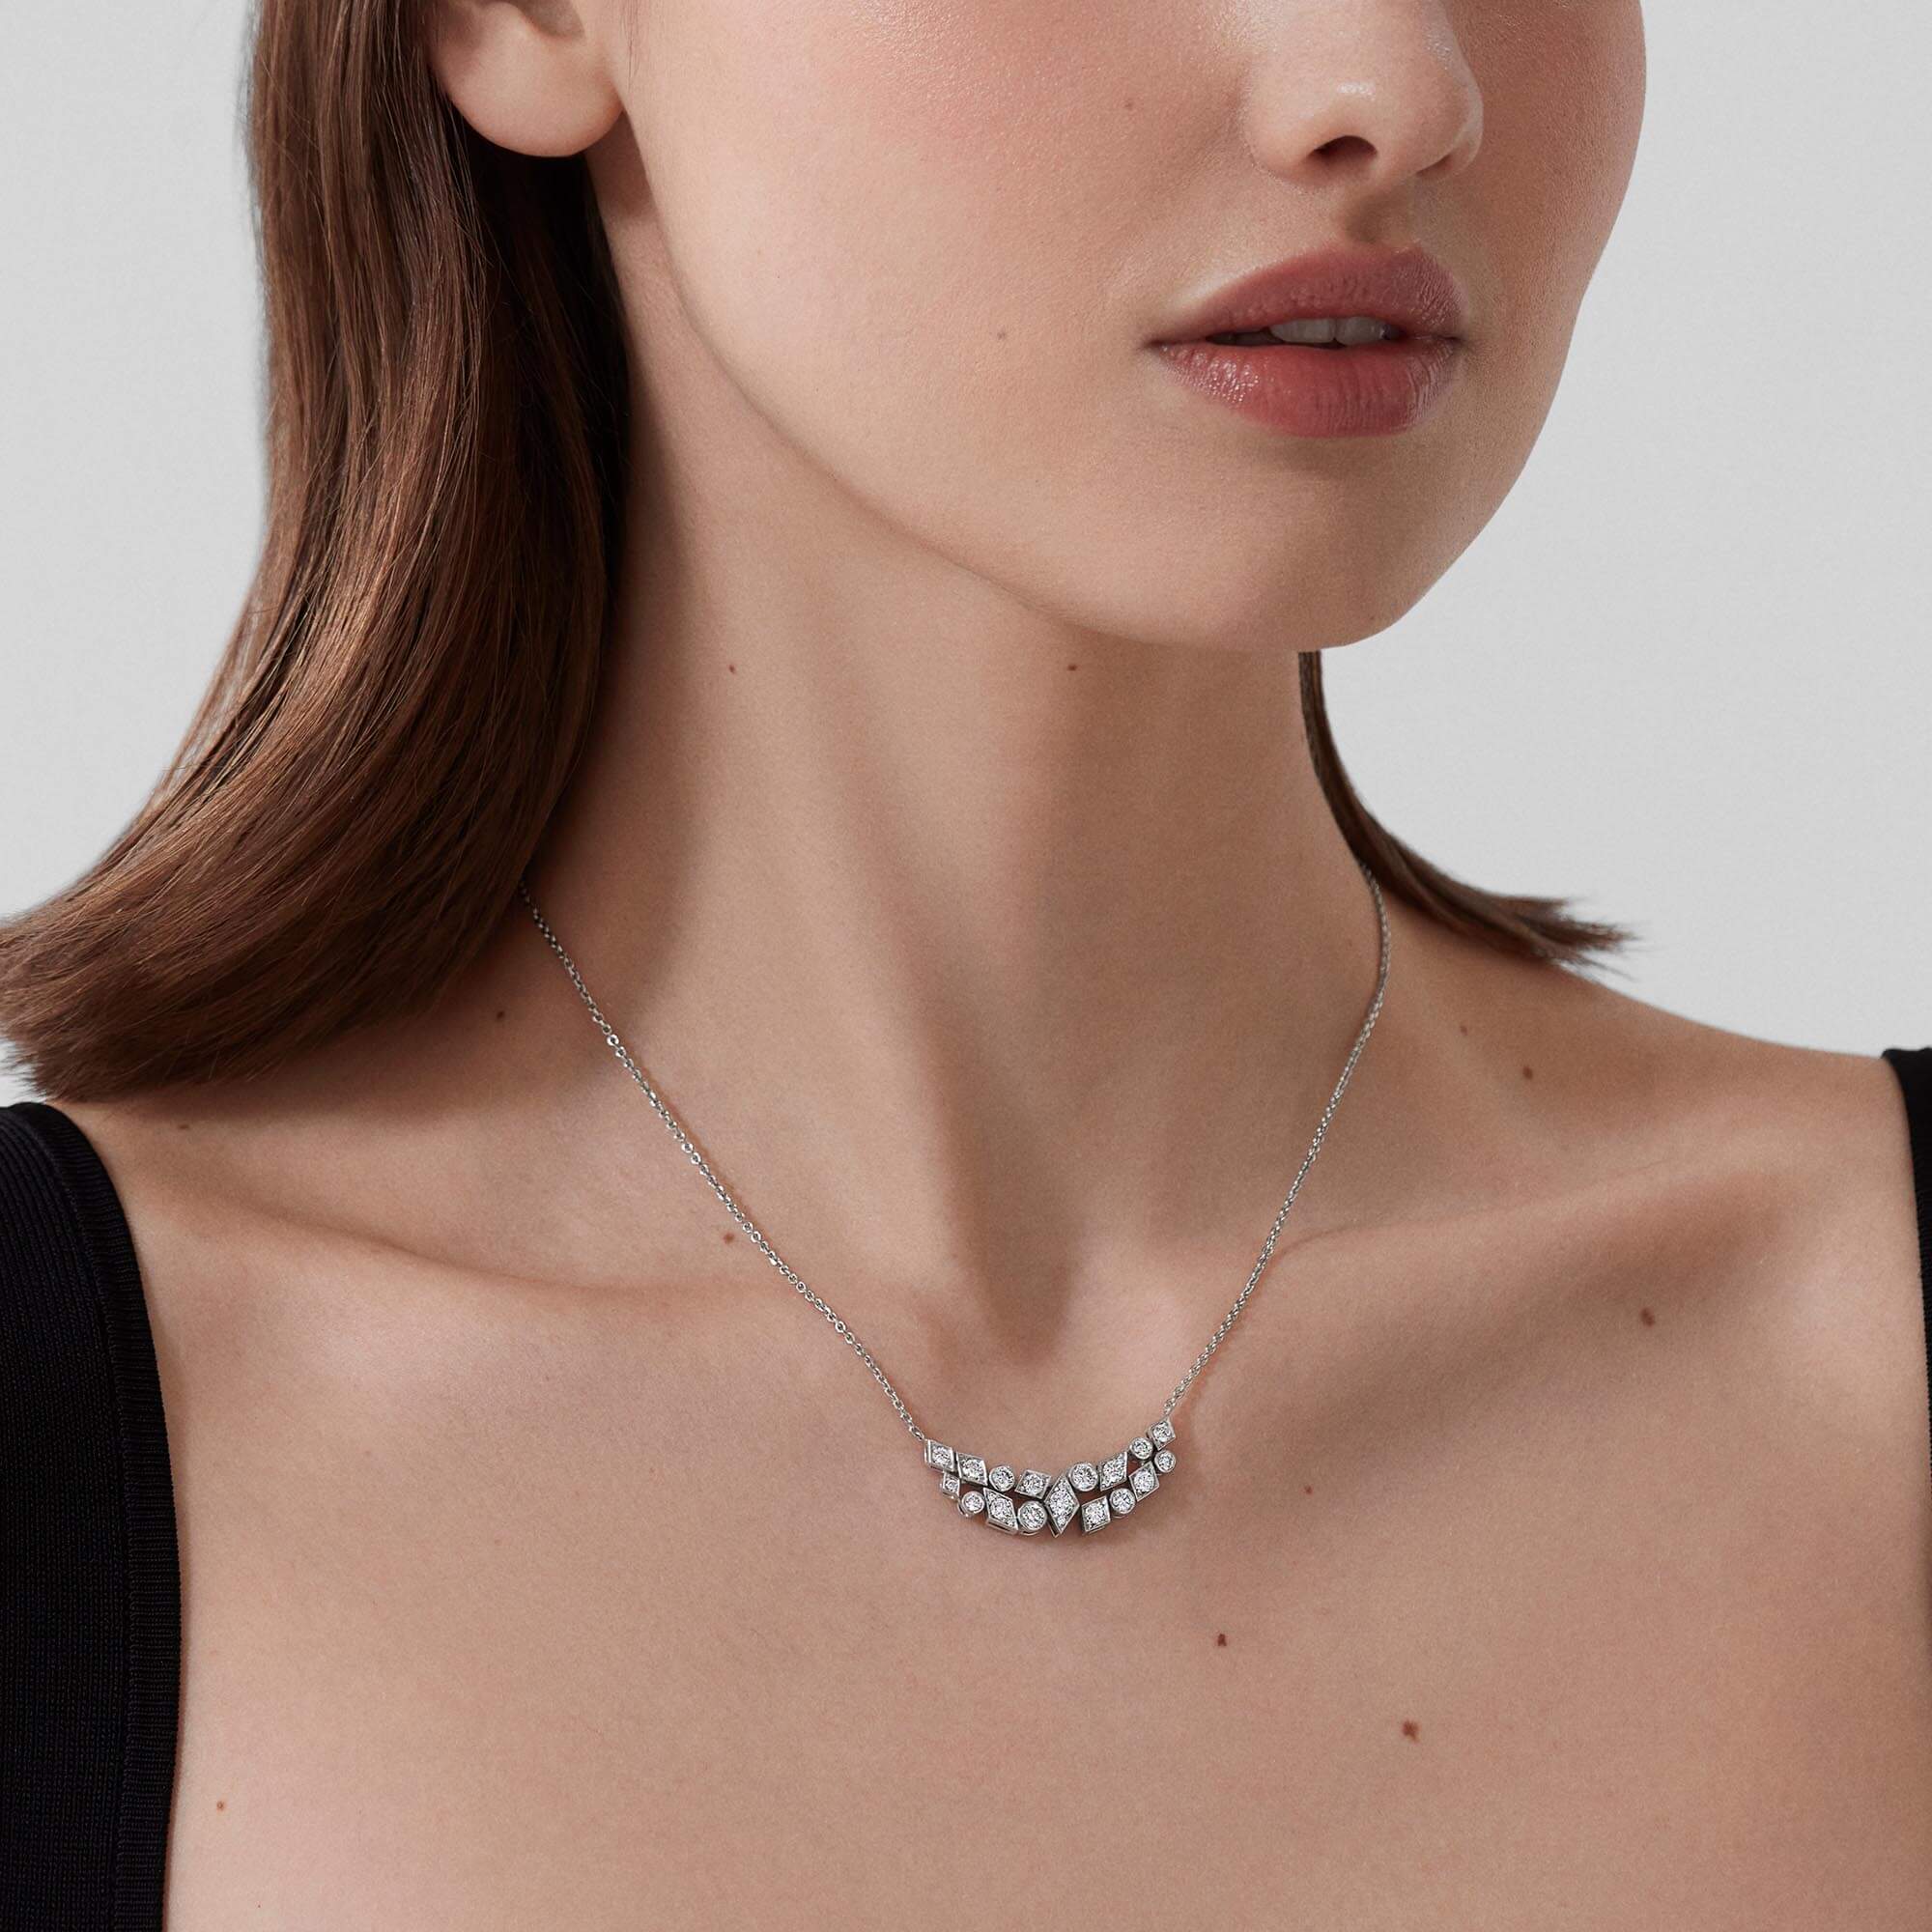 0036 Garrard Albemarle Abstract Transformable Diamond Necklace In 18ct White Gold 2017419 P Model